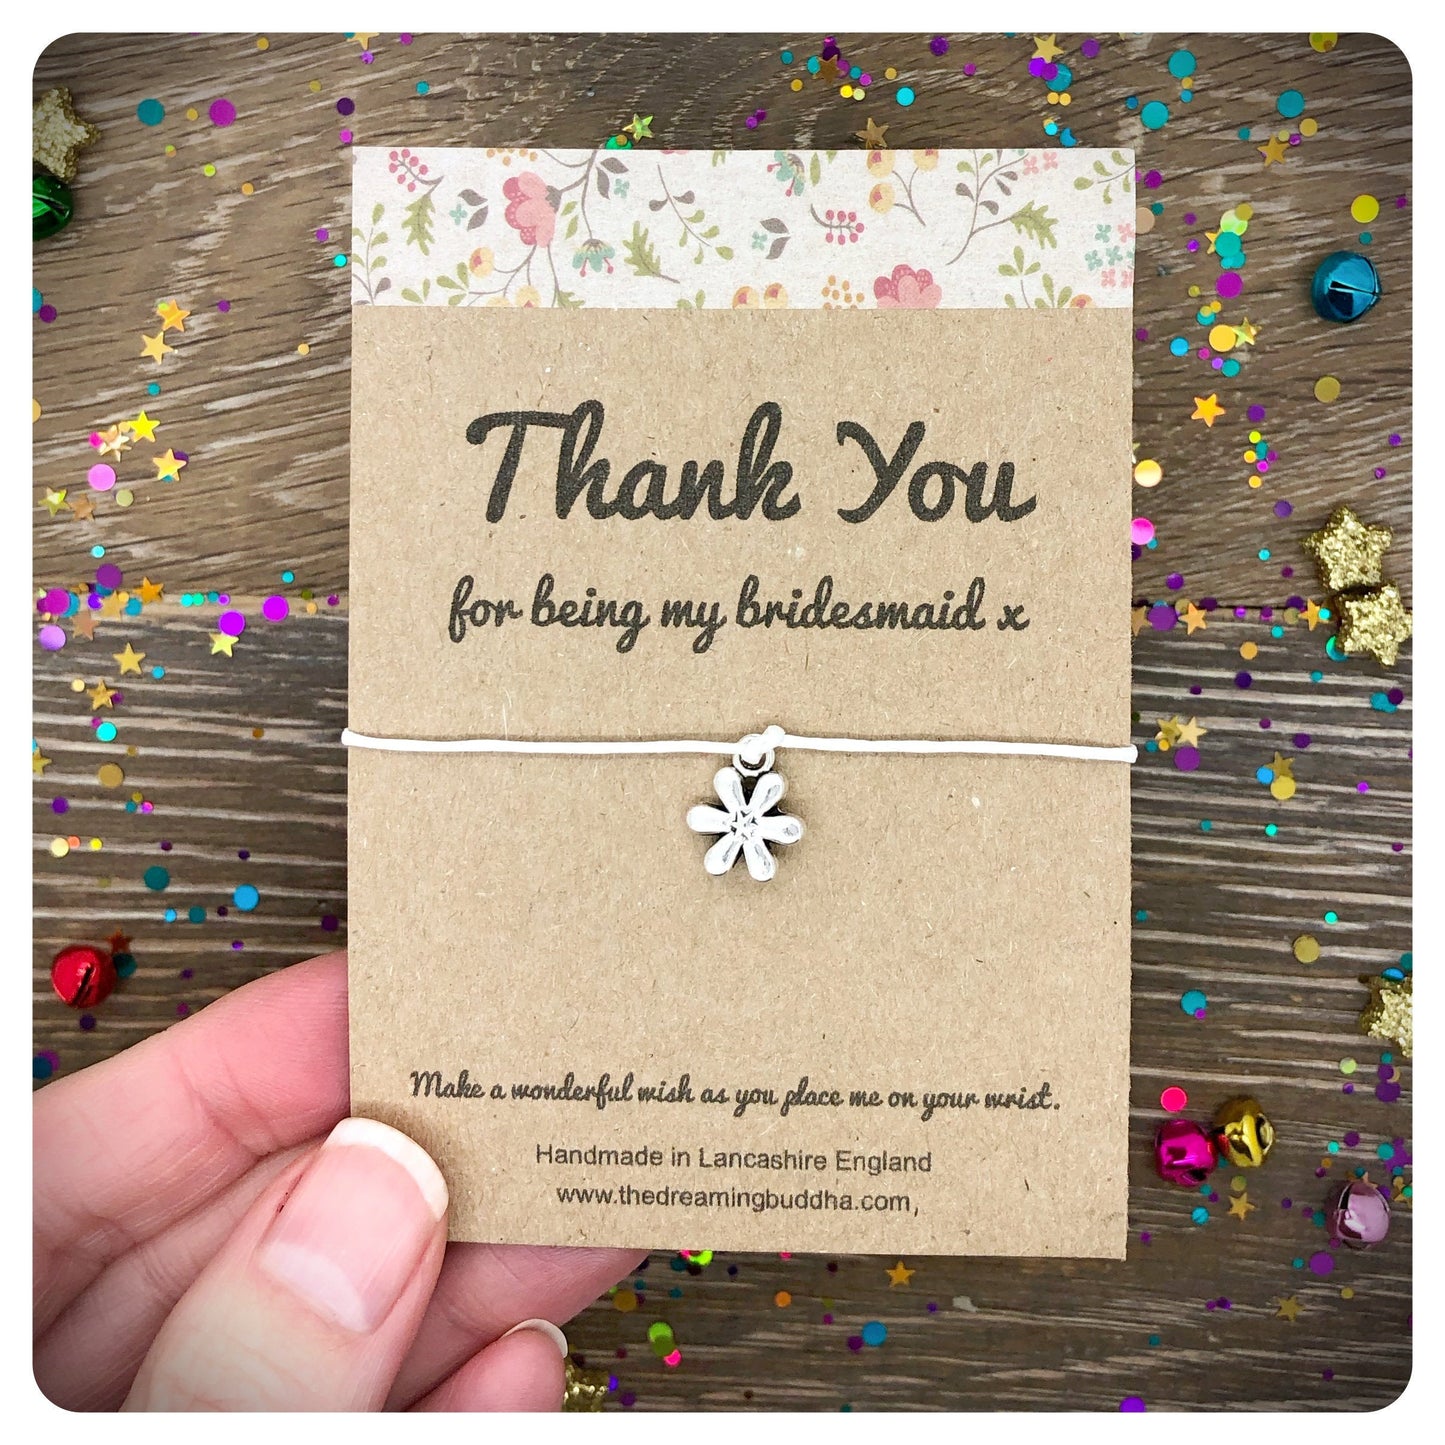 Thank You For Being Our Bridesmaid Card, Small Bridesmaid Gift, Flower Wish Bracelet Present For Bridesmaid